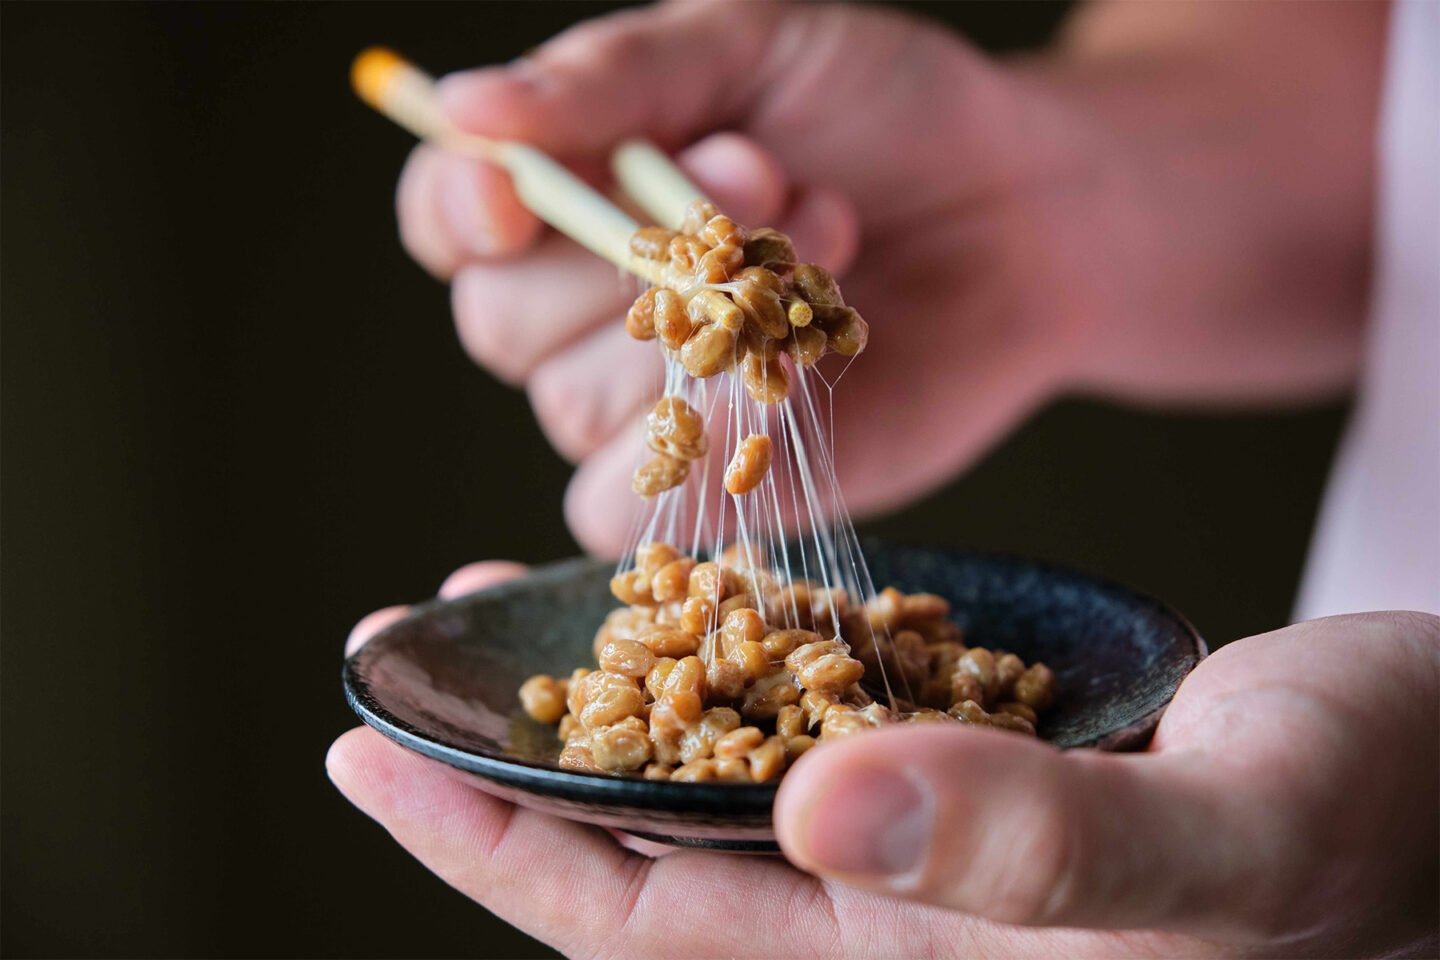 hand holding chopsticks with natto fermented soy beans